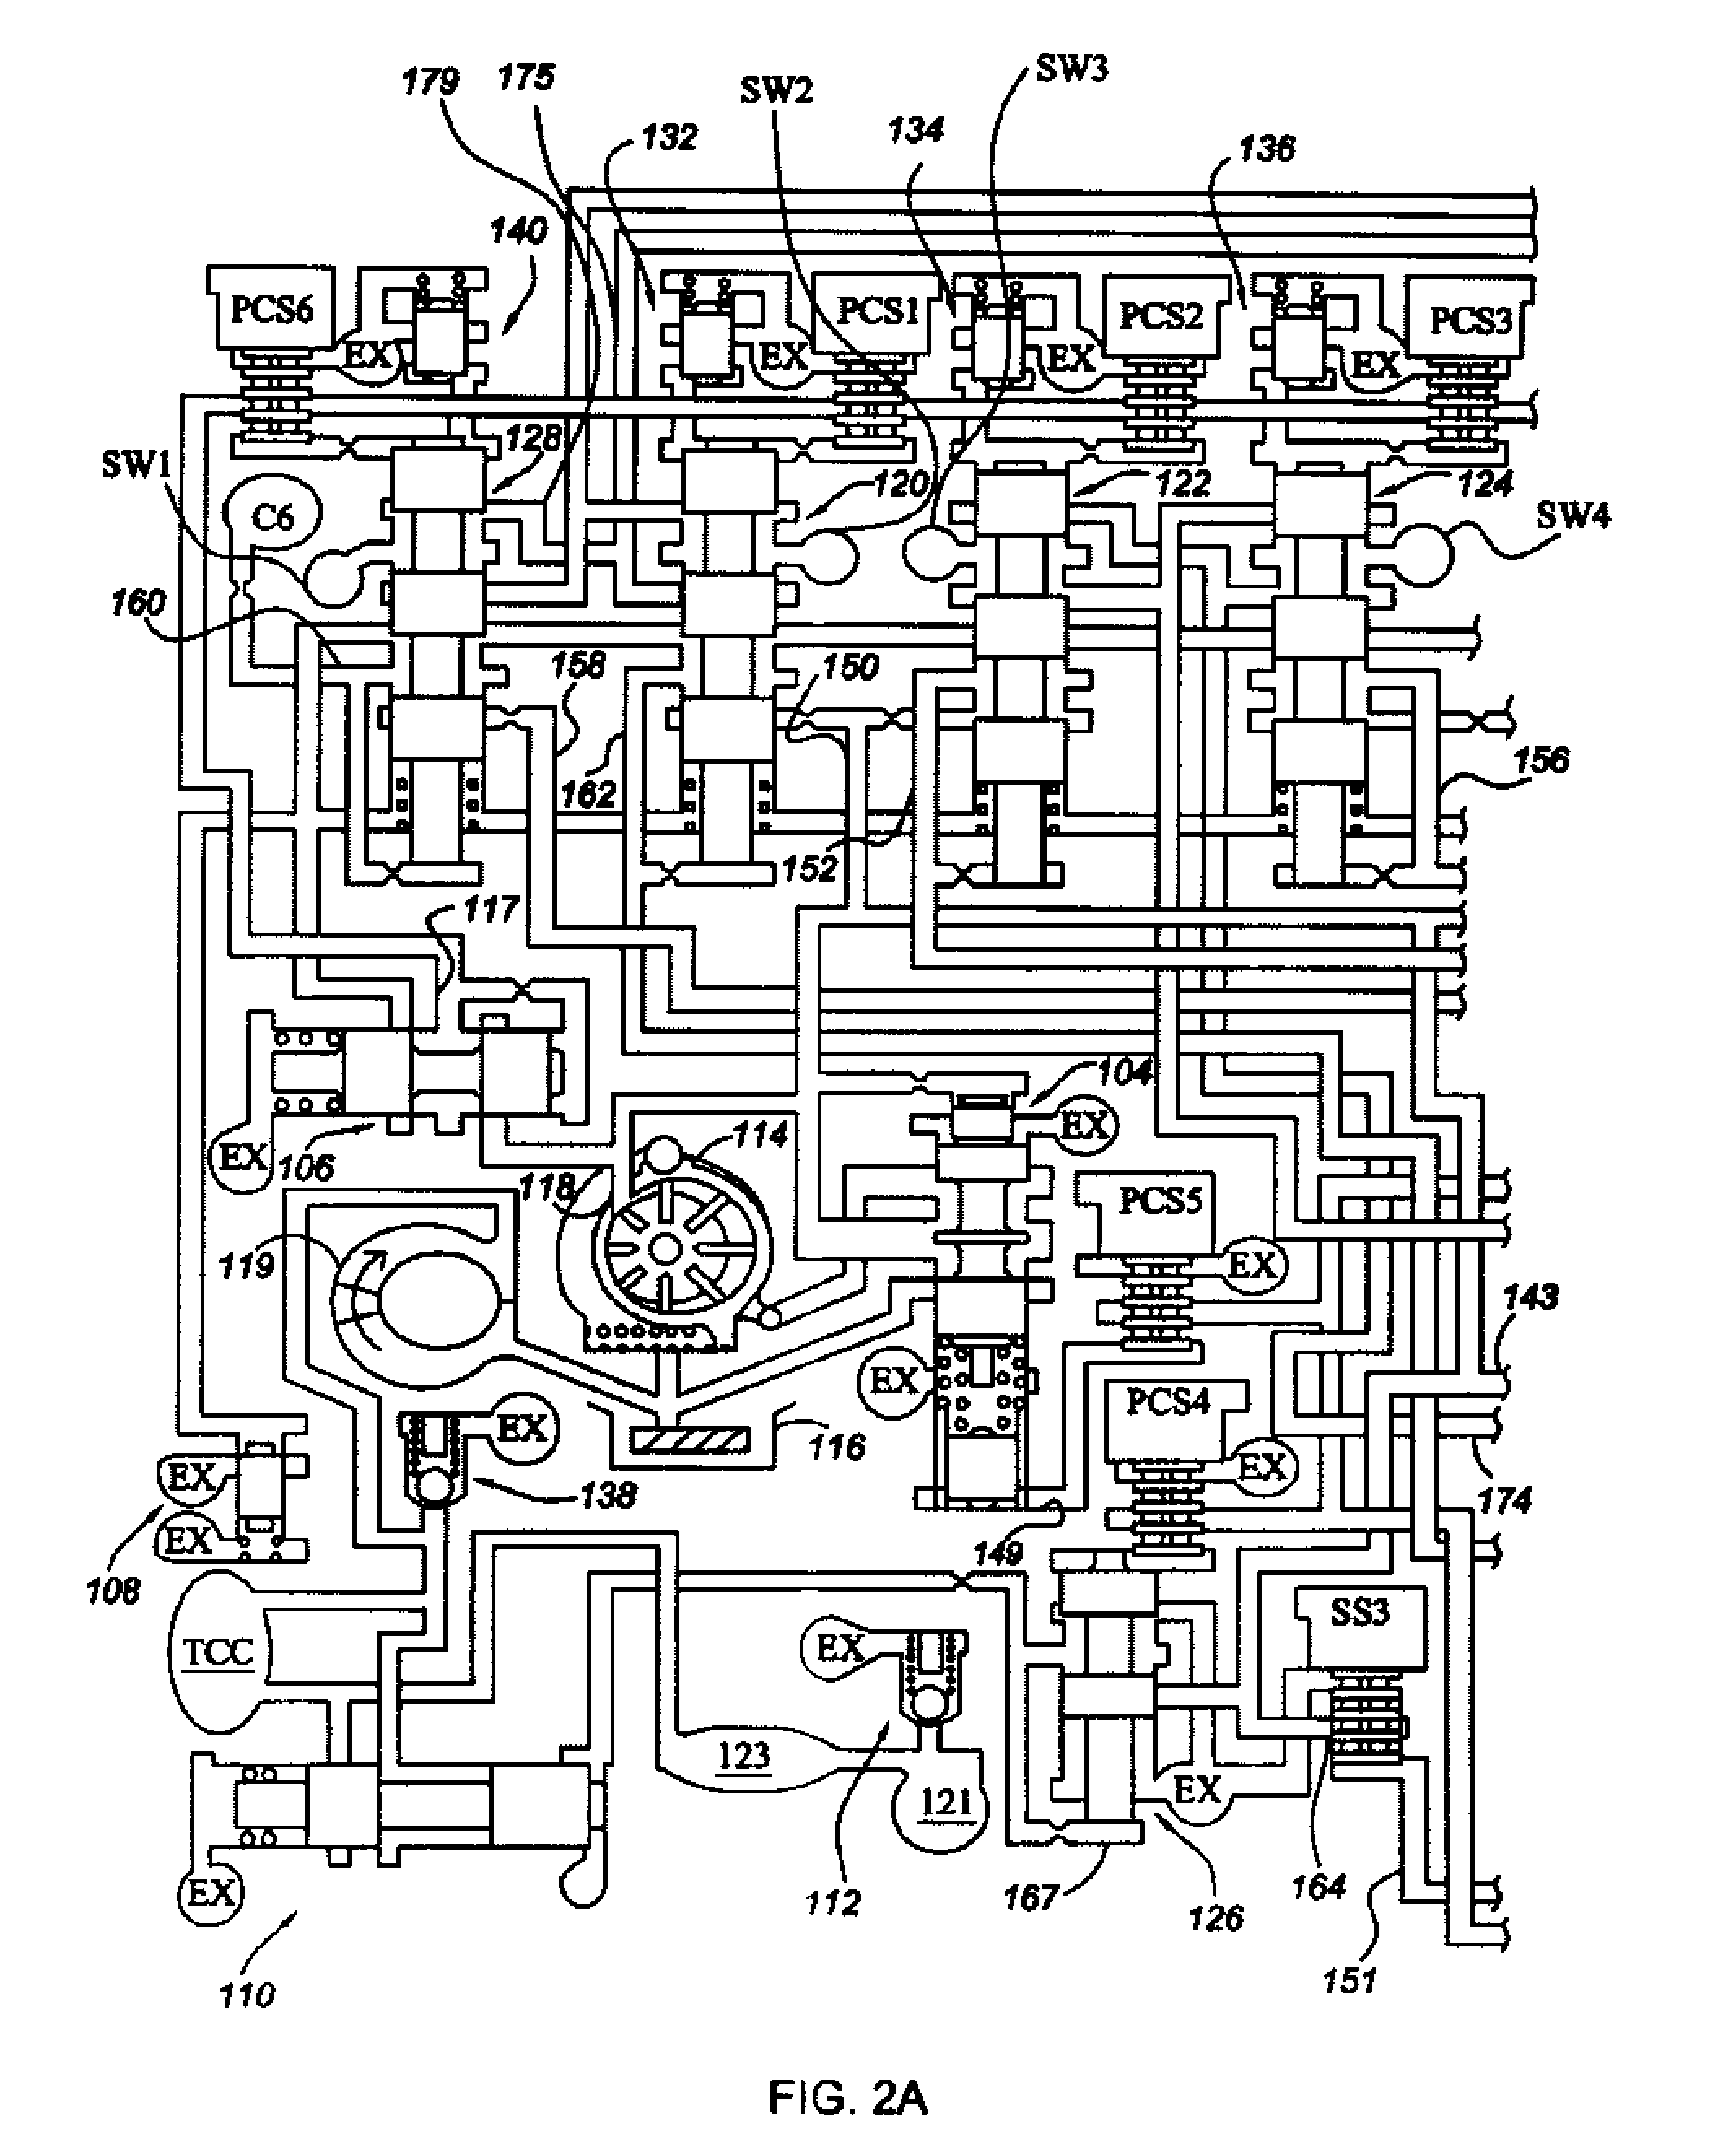 Electro-hydraulic control system with three-position dog clutch actuator valve